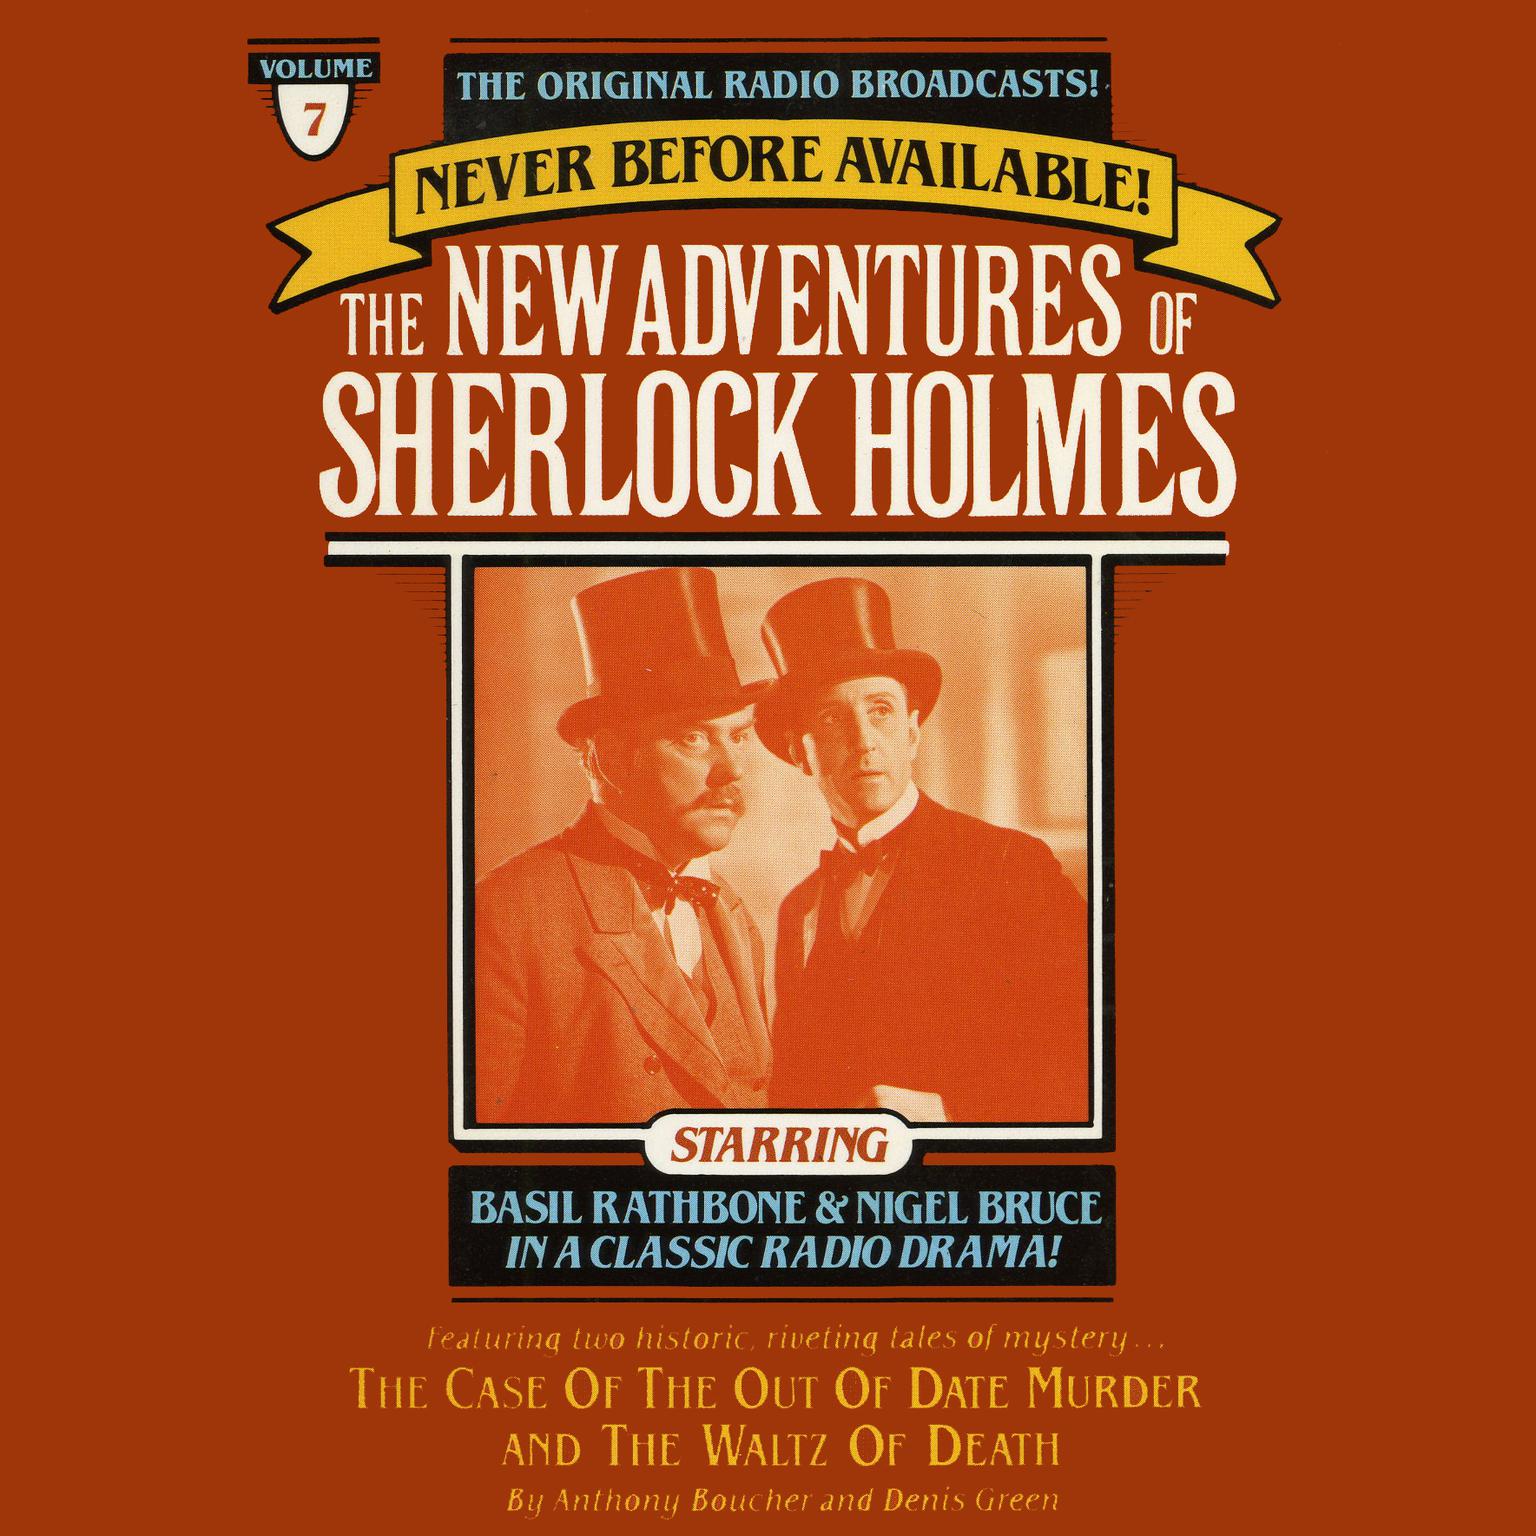 The Case of the Out of Date Murder and The Waltz of Death (Abridged): The New Adventures of Sherlock Holmes, Episode 7 Audiobook, by Anthony Boucher